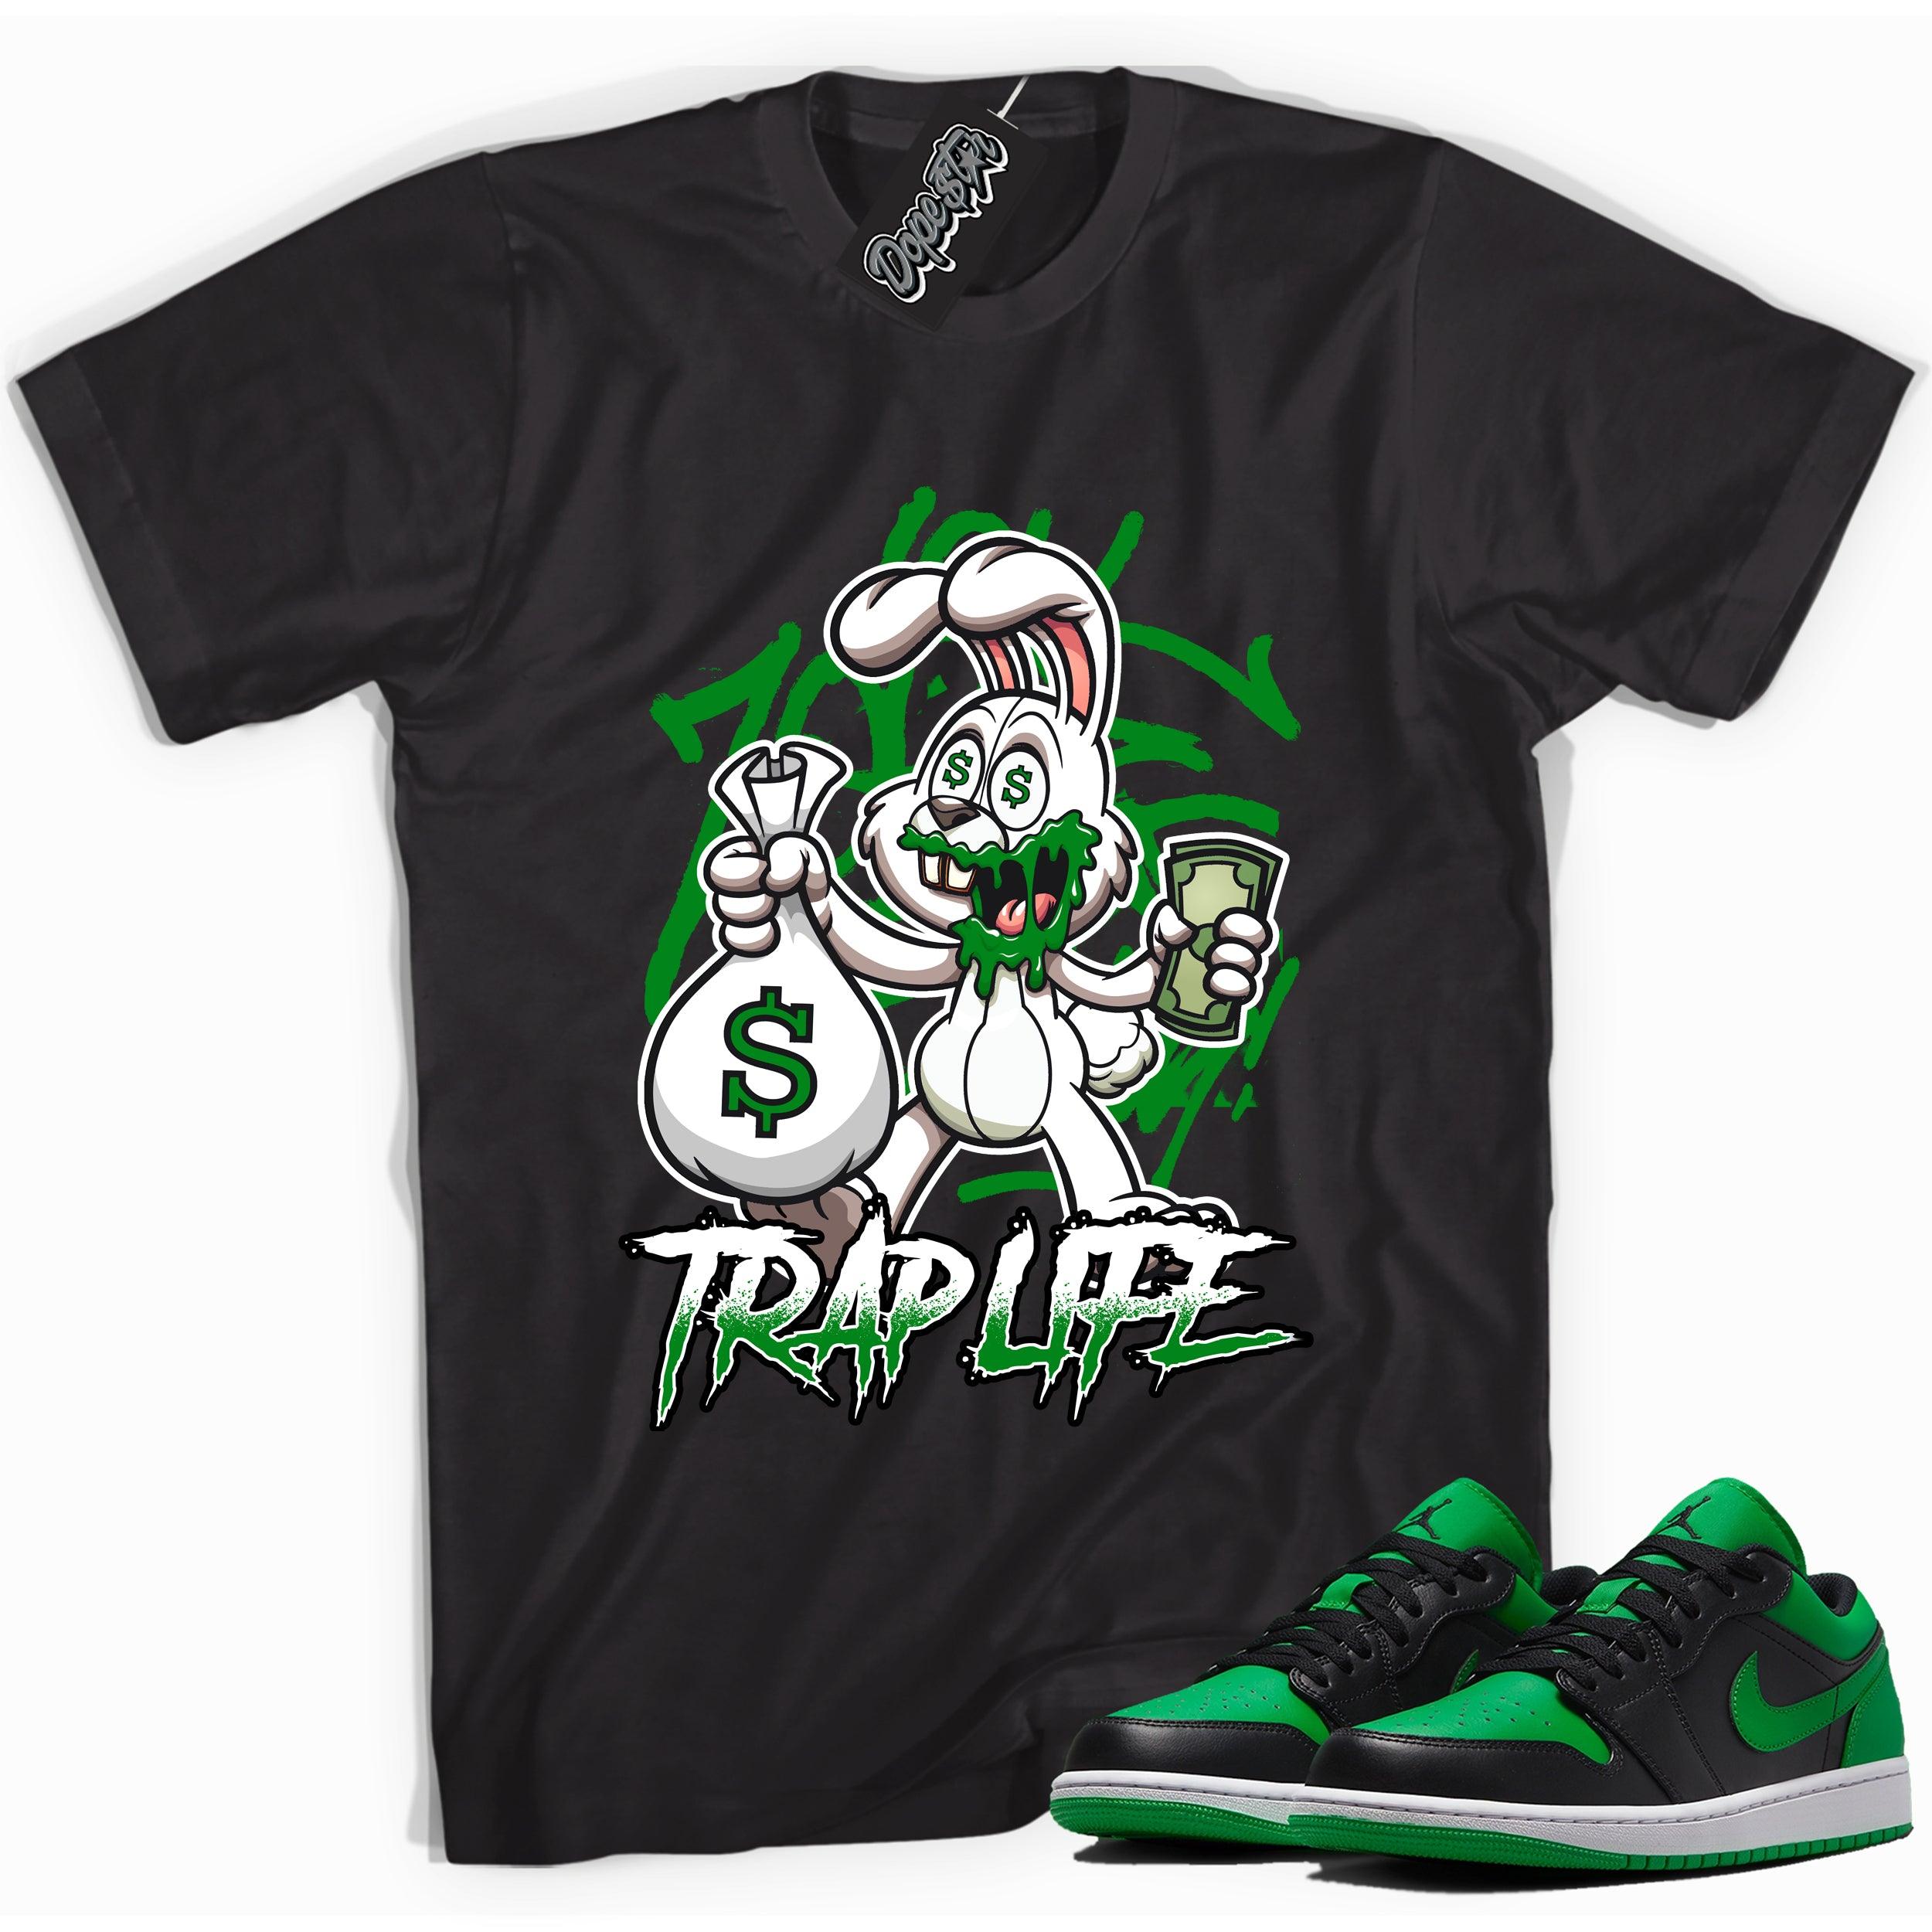 Cool black graphic tee with 'trap life rabbit' print, that perfectly matches Air Jordan 1 Low Lucky Green sneakers